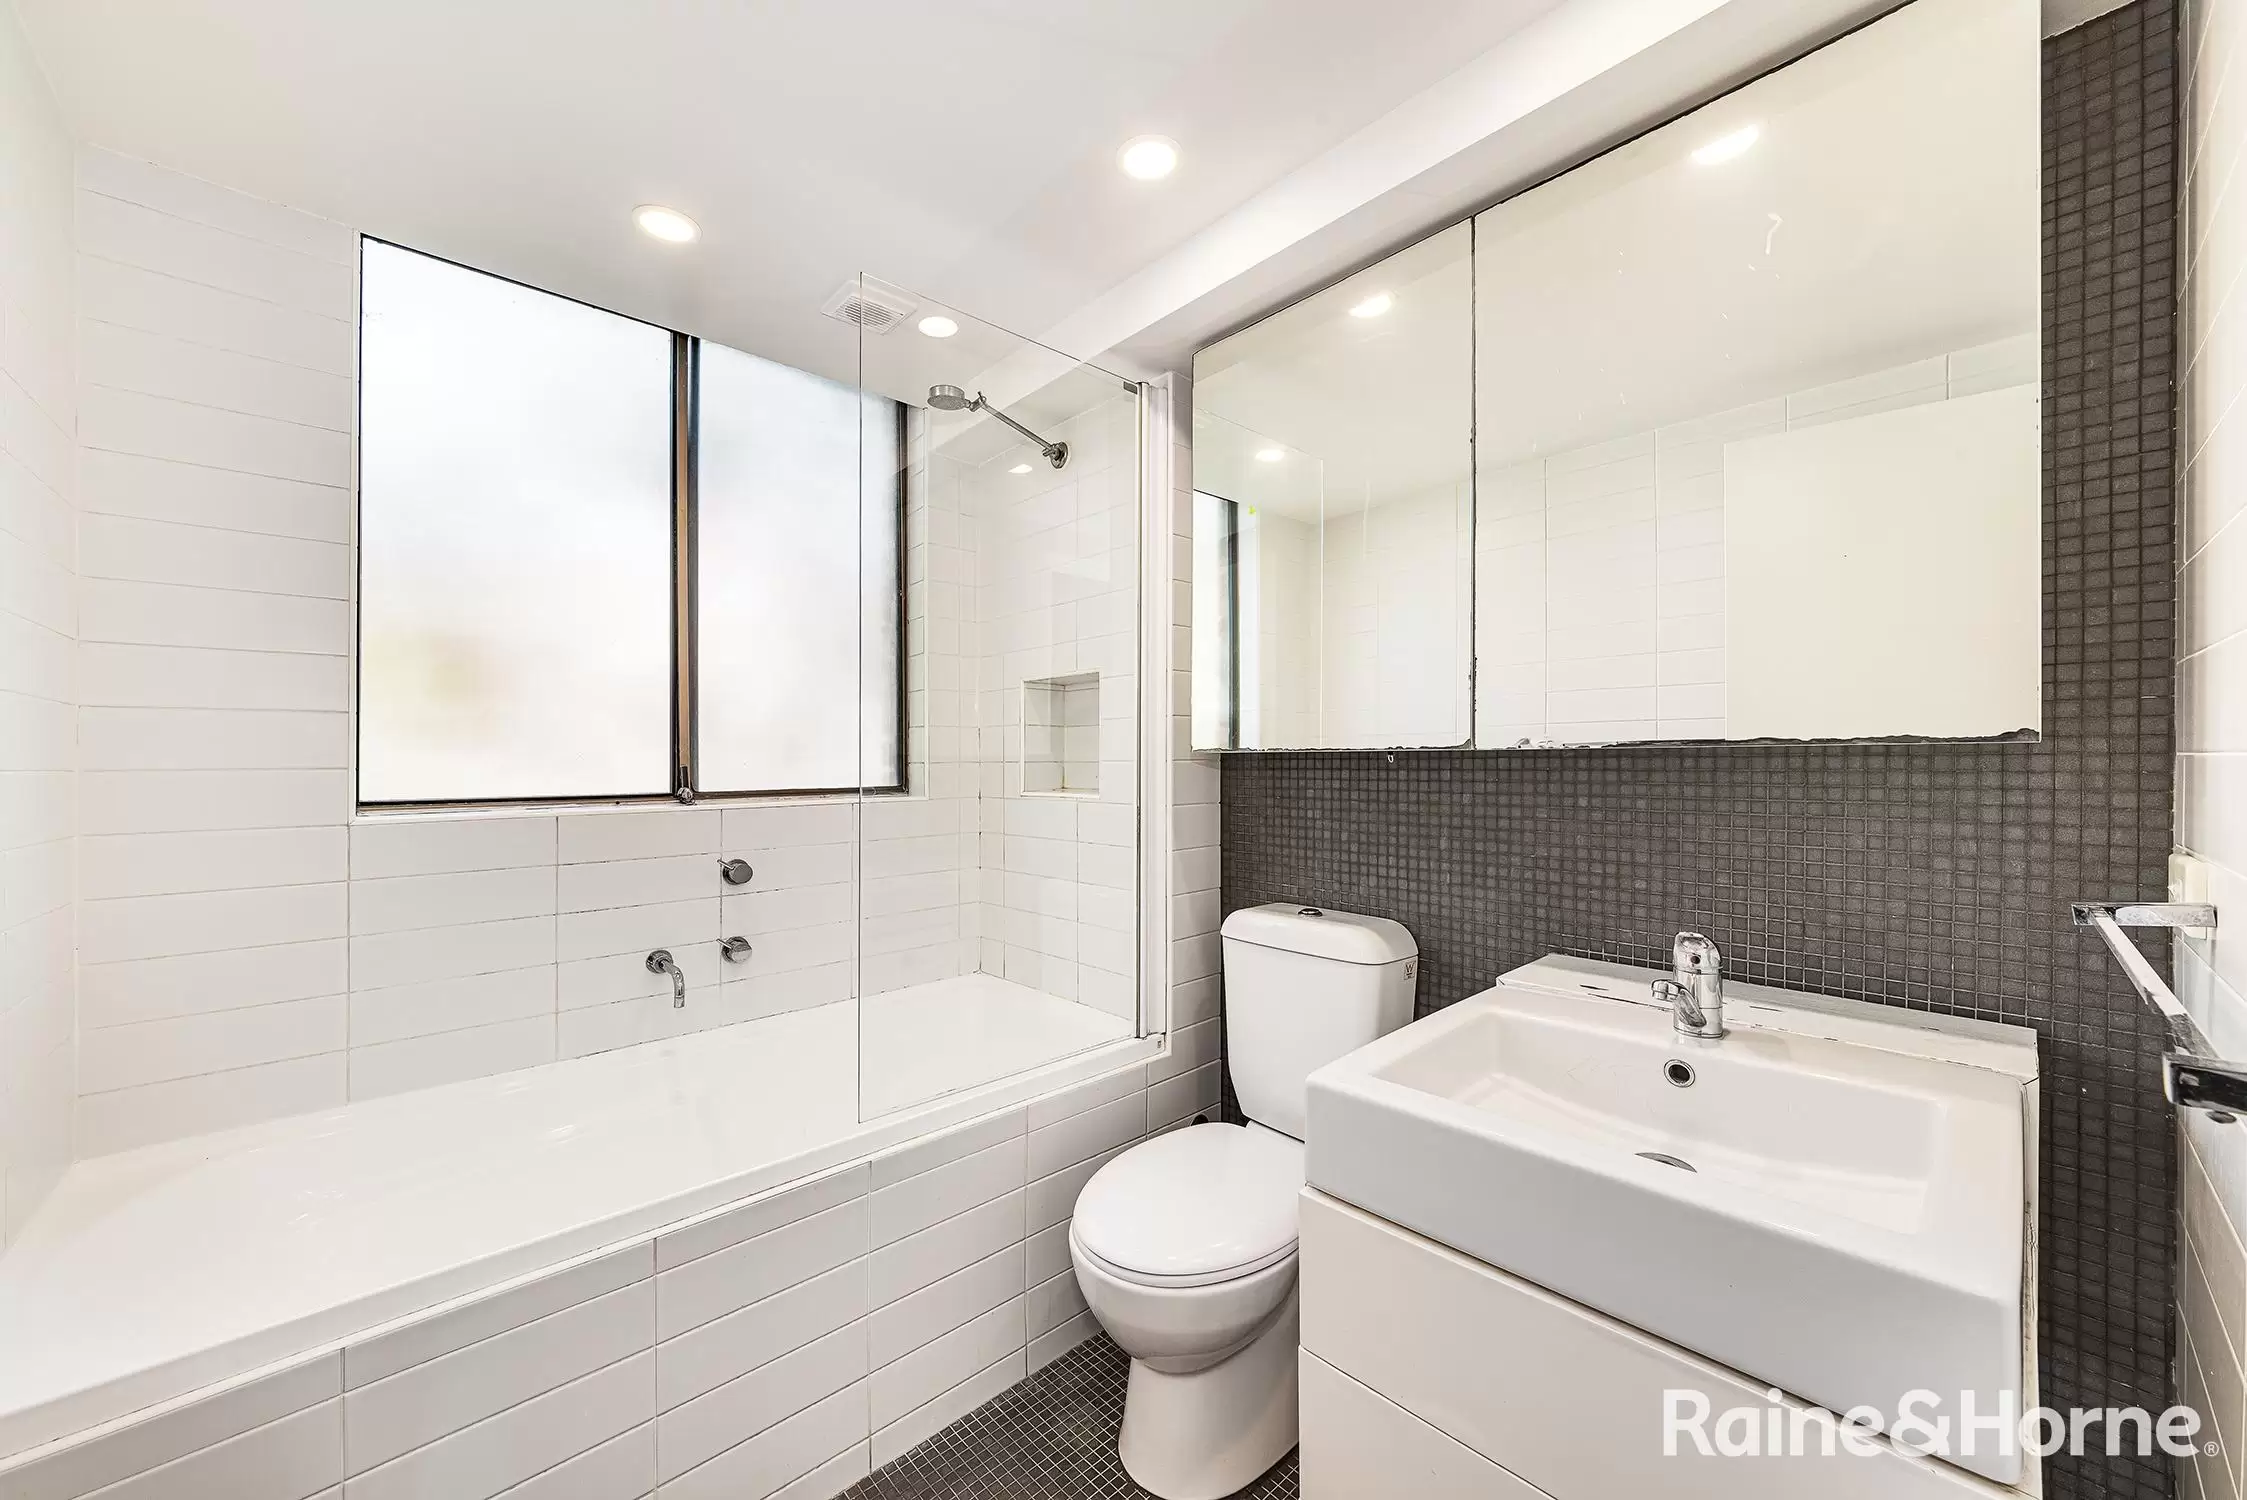 6/84 Melody Street, Coogee Leased by Raine & Horne Randwick | Coogee - image 4